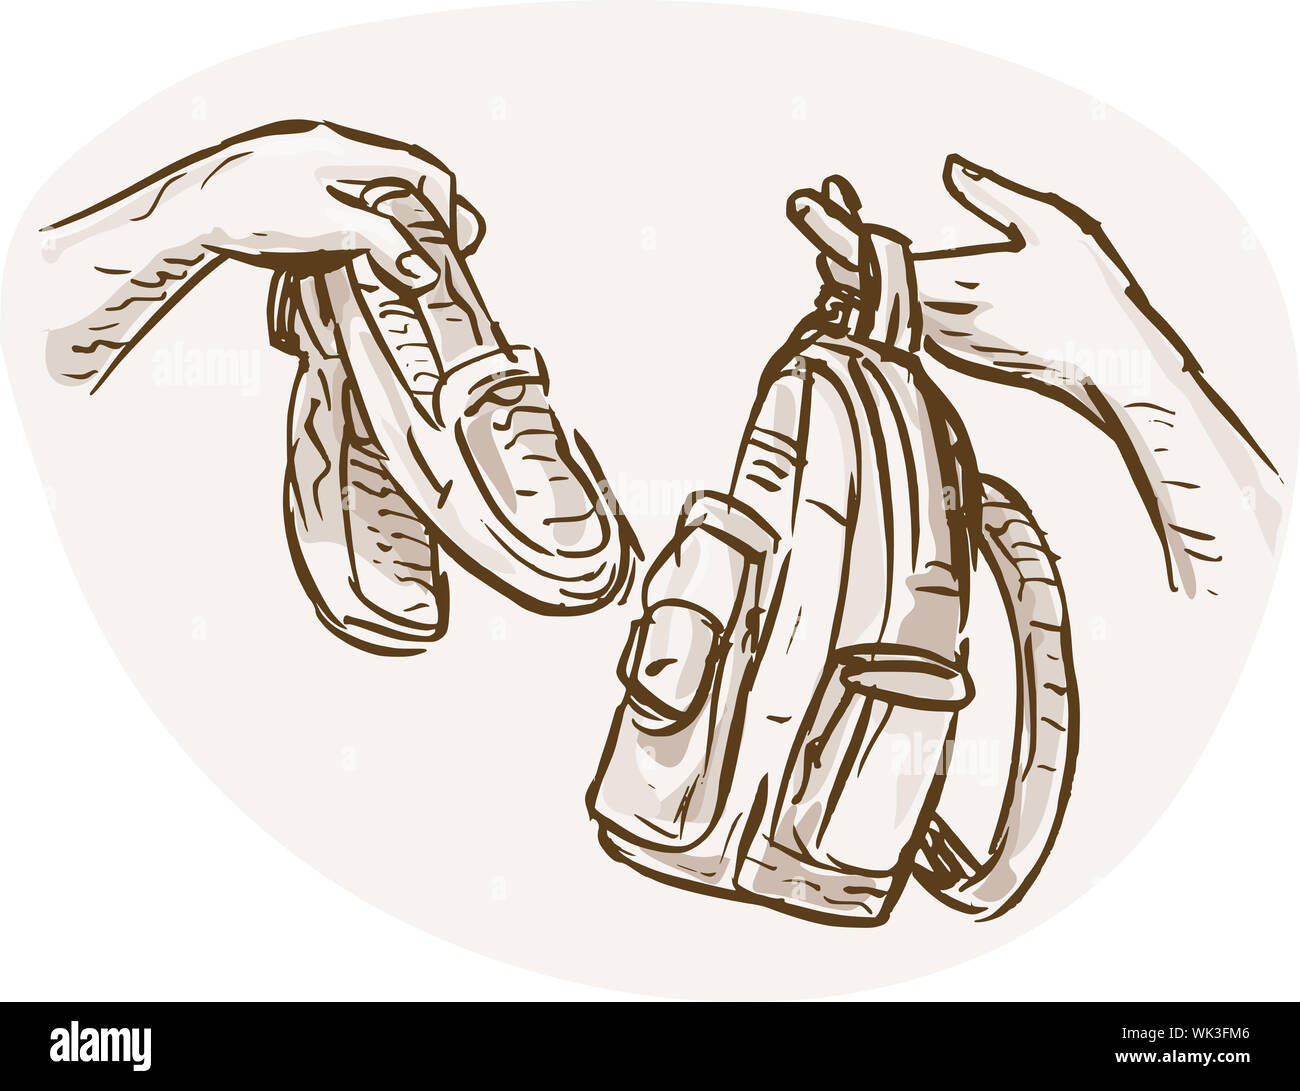 hand drawn sketched illustration of Hands Barter trading or swapping shoes and backpack or bag. Stock Photo